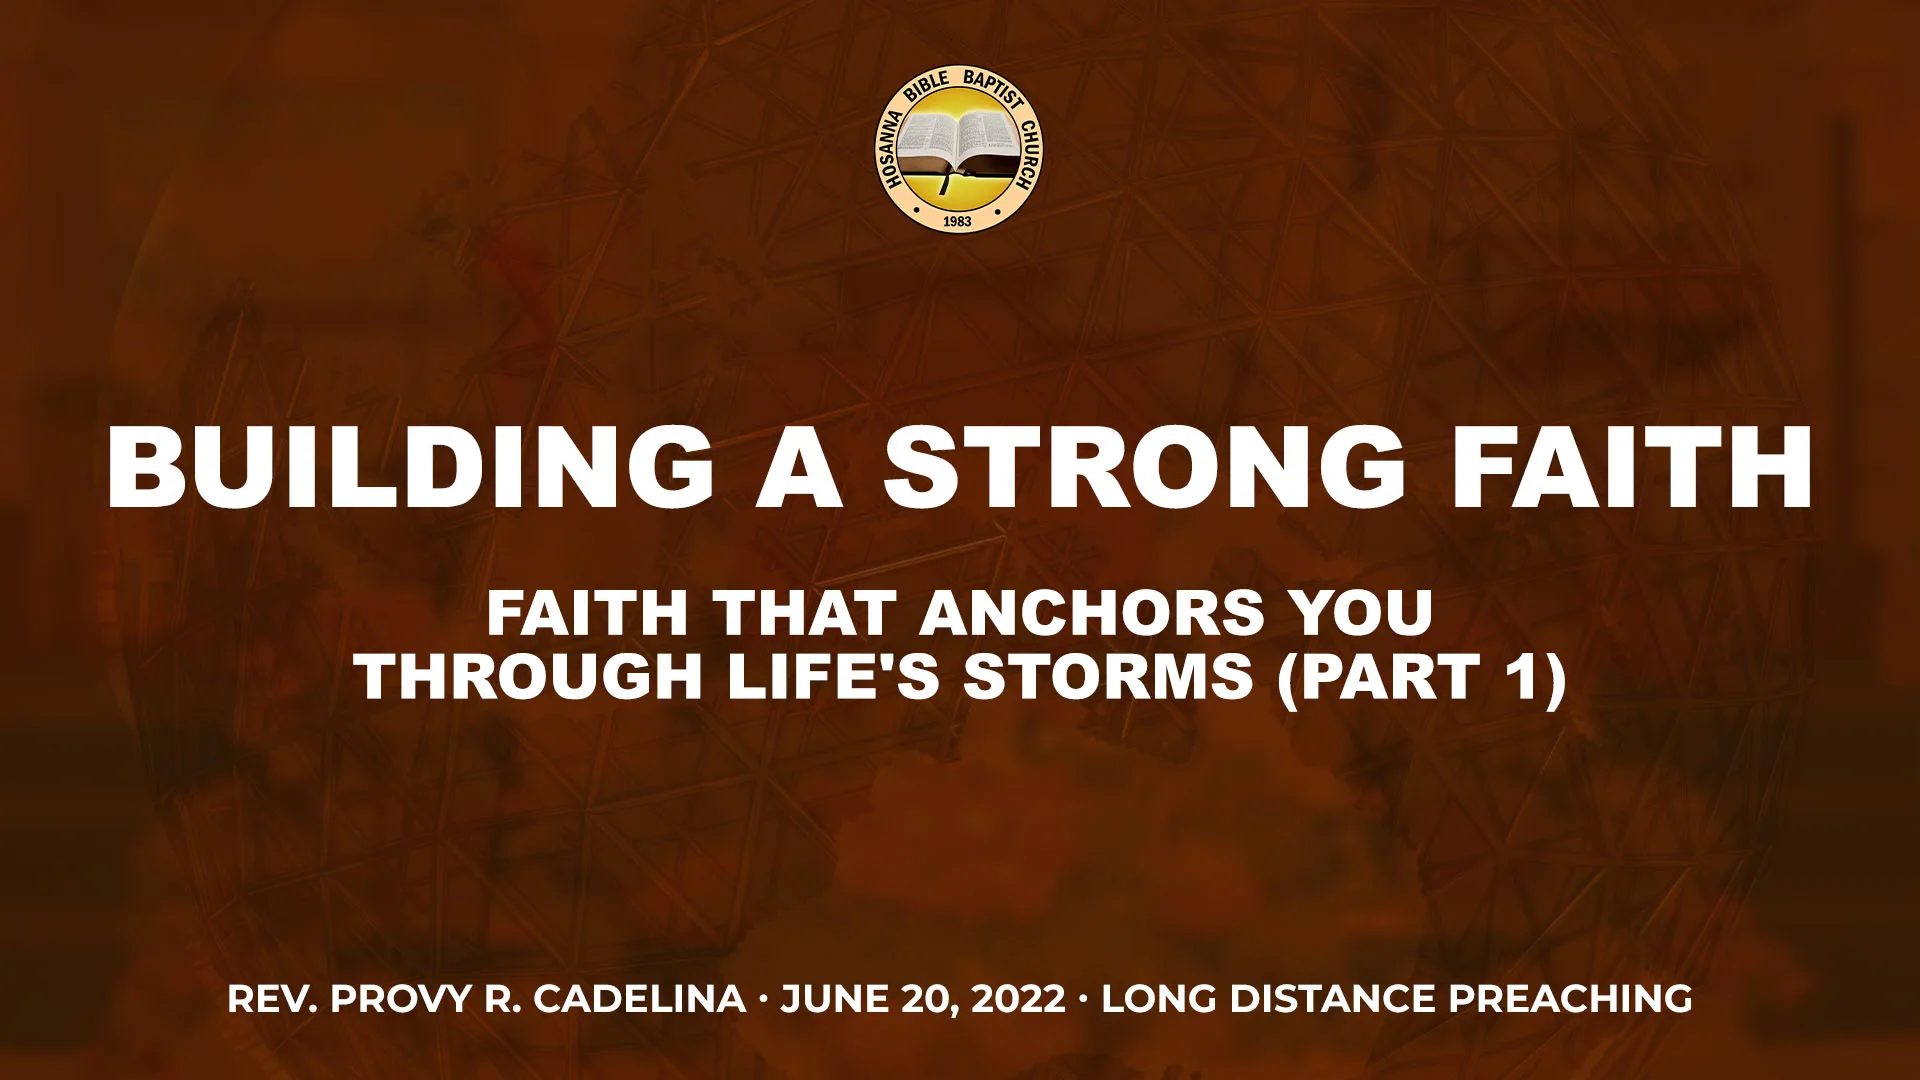 Building A Strong Faith (Part 1) - Lesson 1: Why It Is Important To Build A Strong Faith